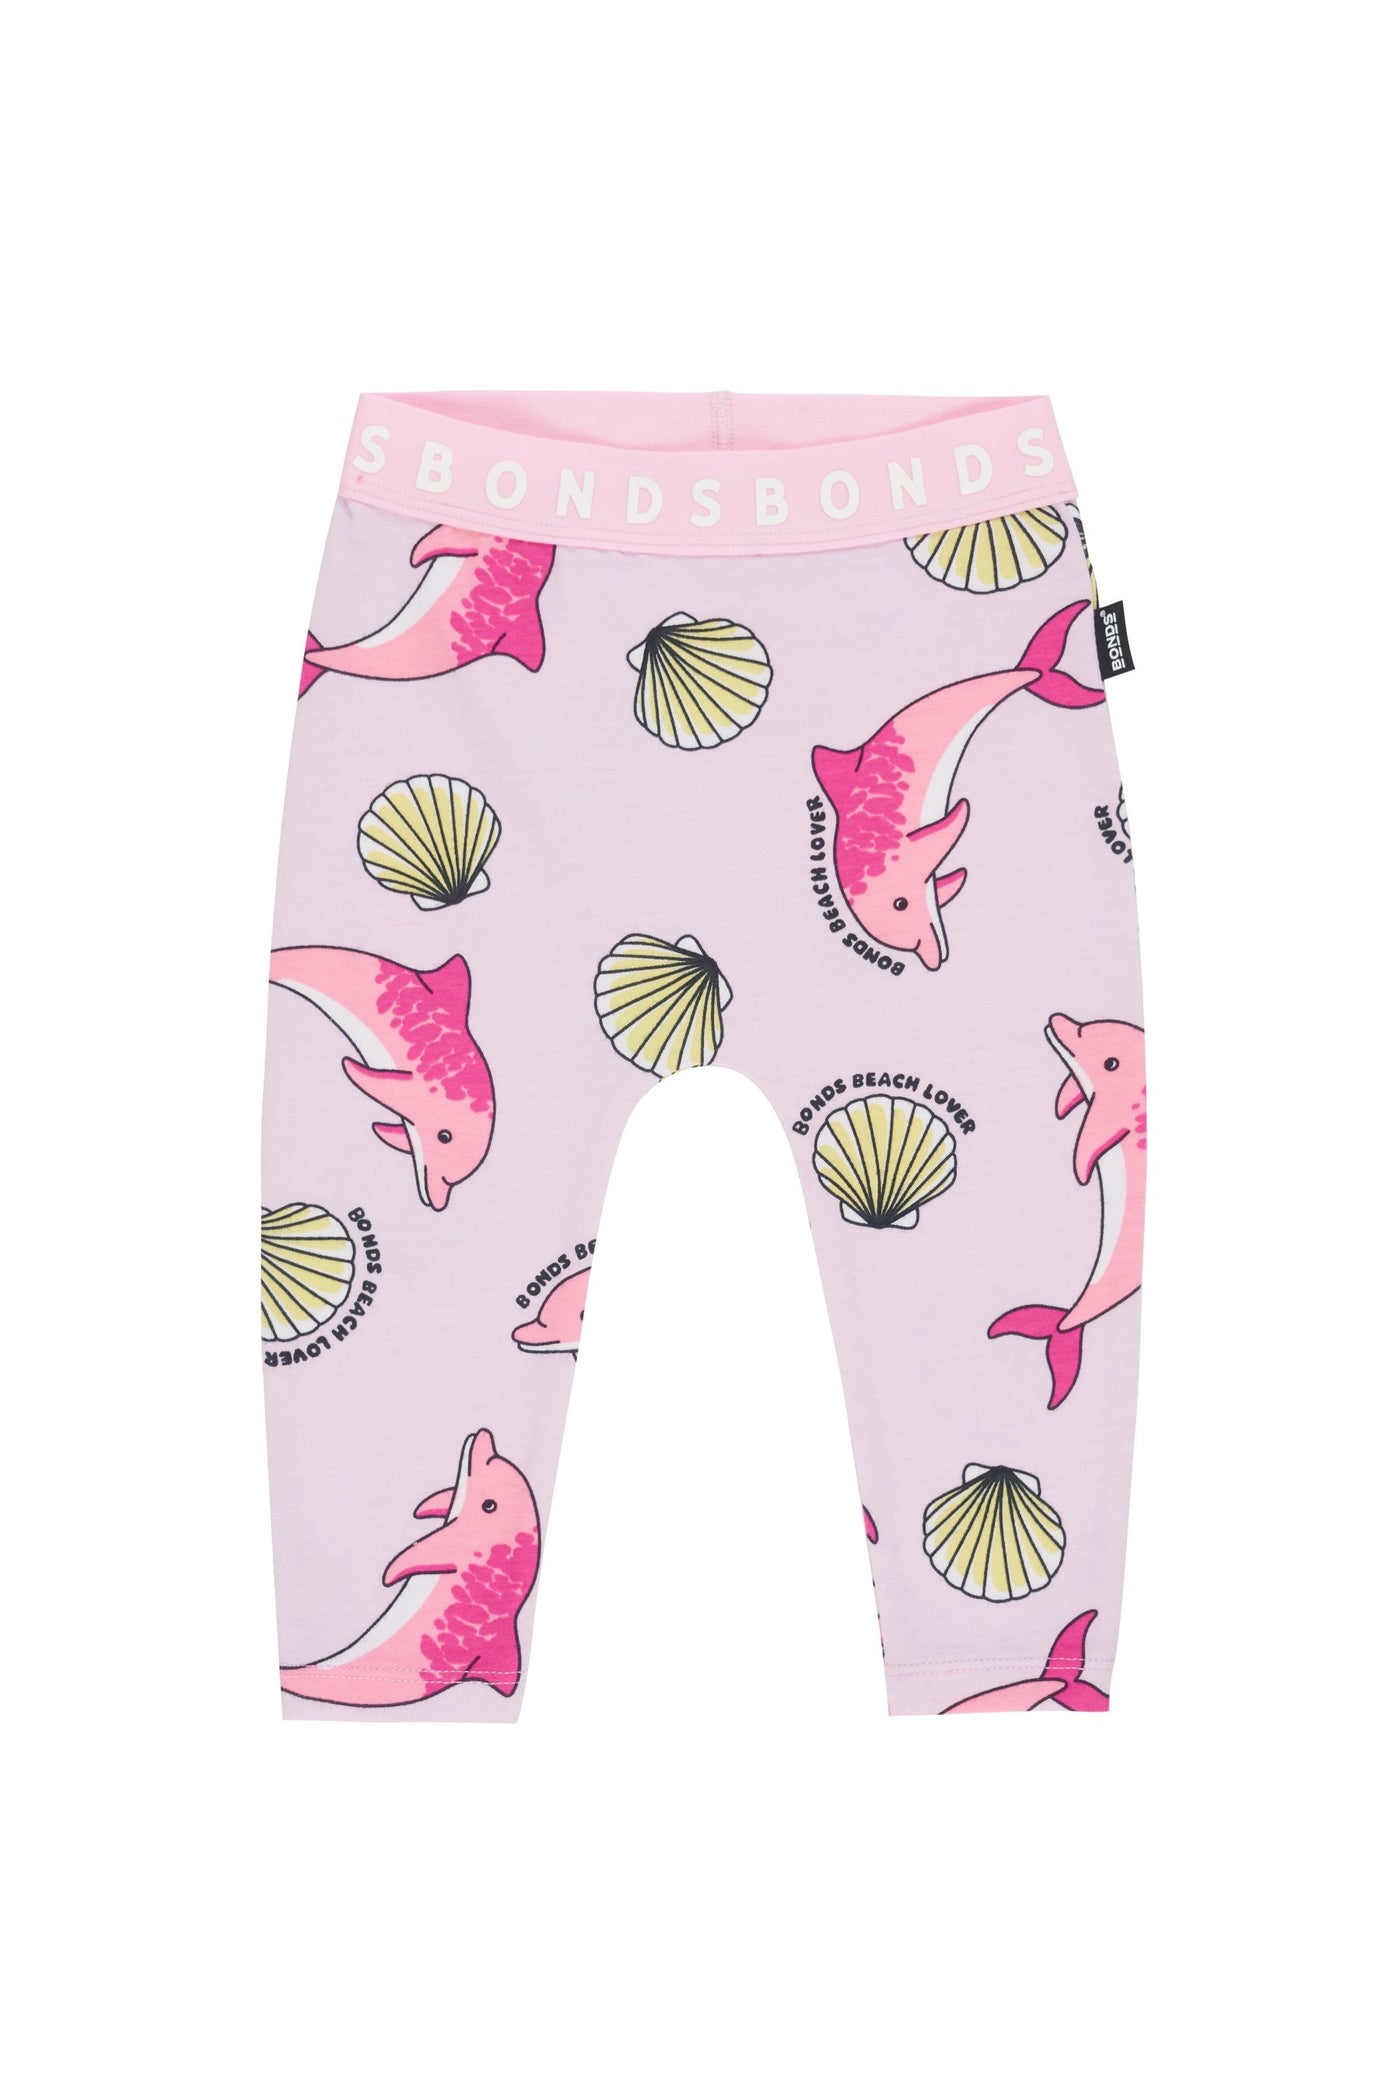 Bonds Stretchies Leggings Dolly Dolphin